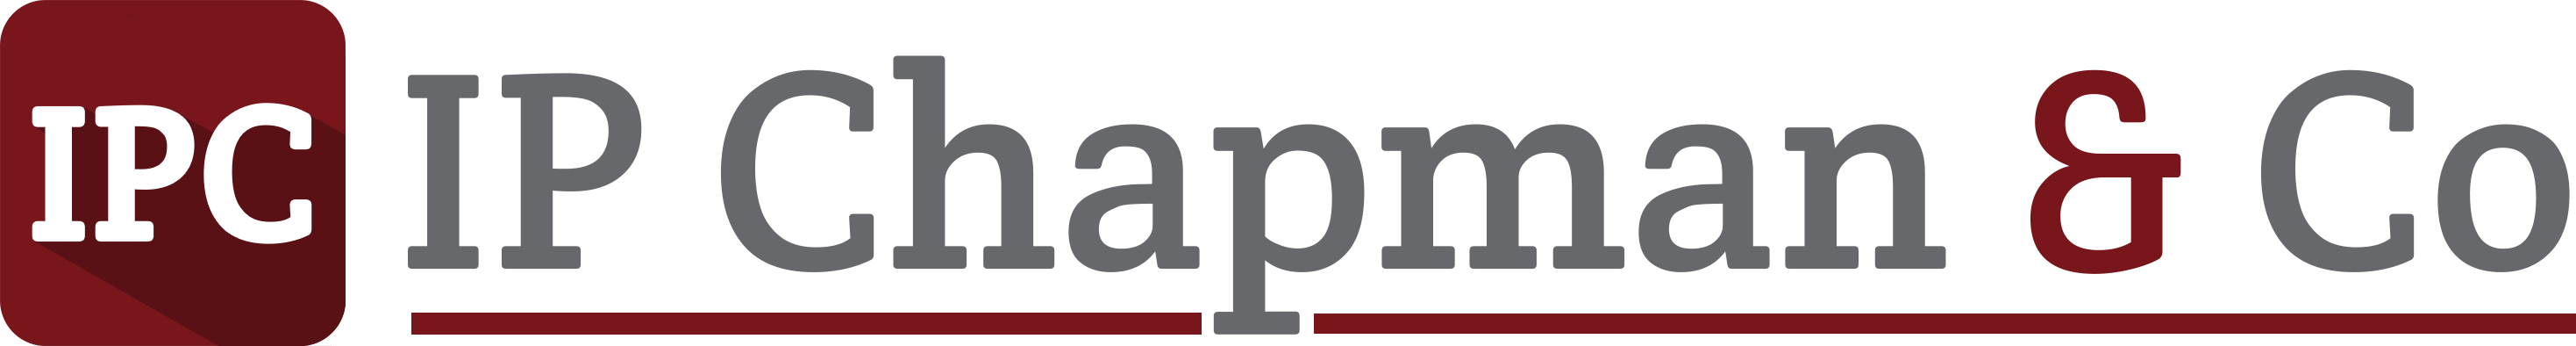 IP Chapman & Co logo with text